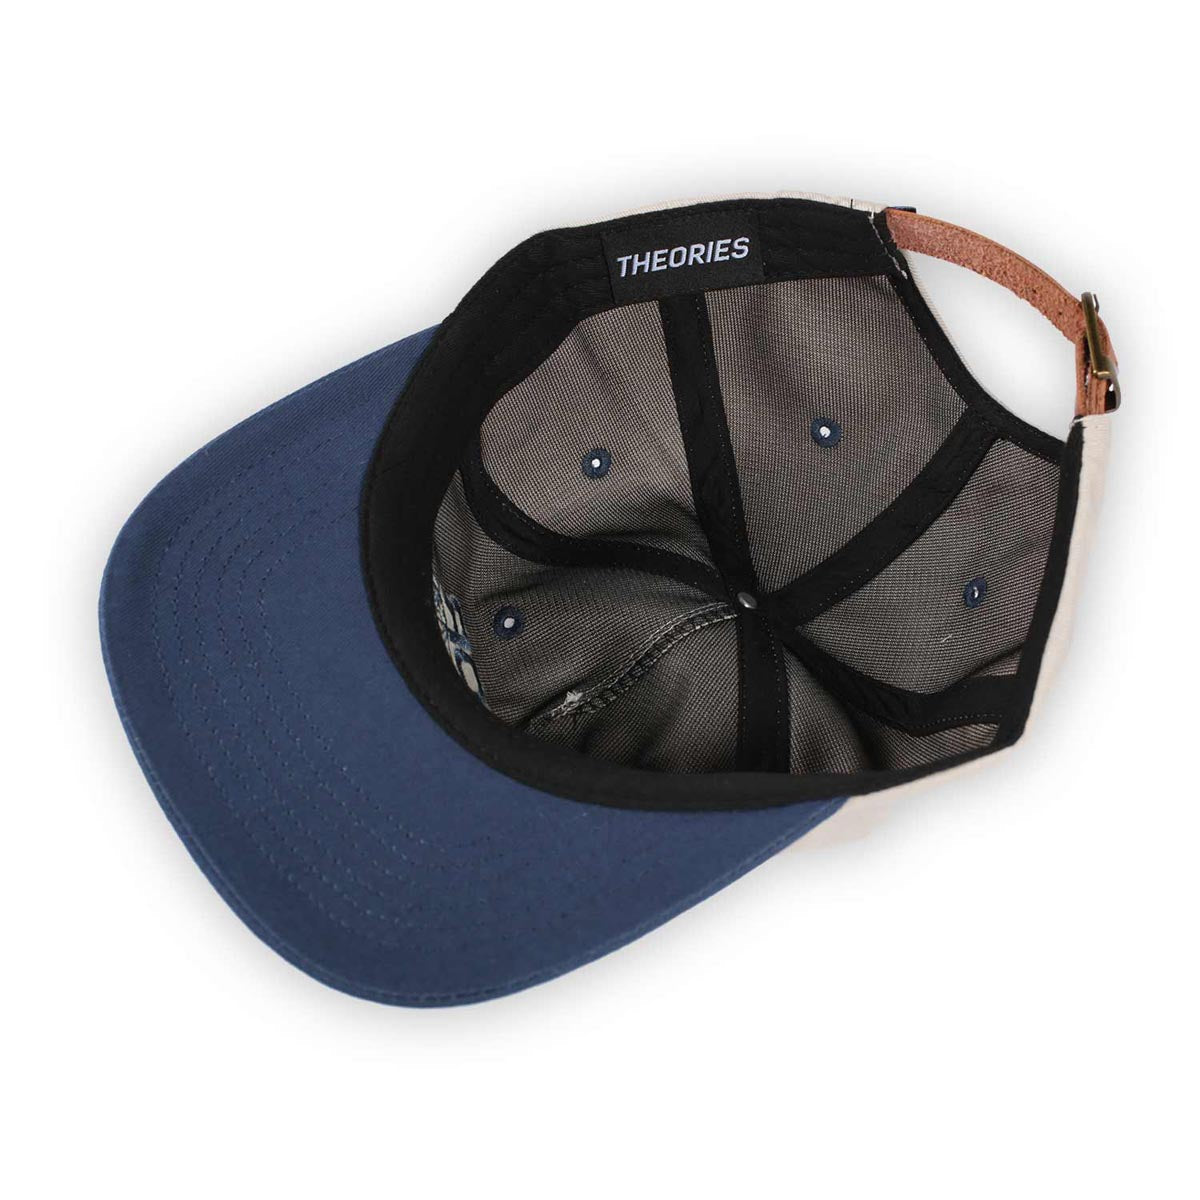 Theories New Generation Hat - Ivory/Slate Blue image 3